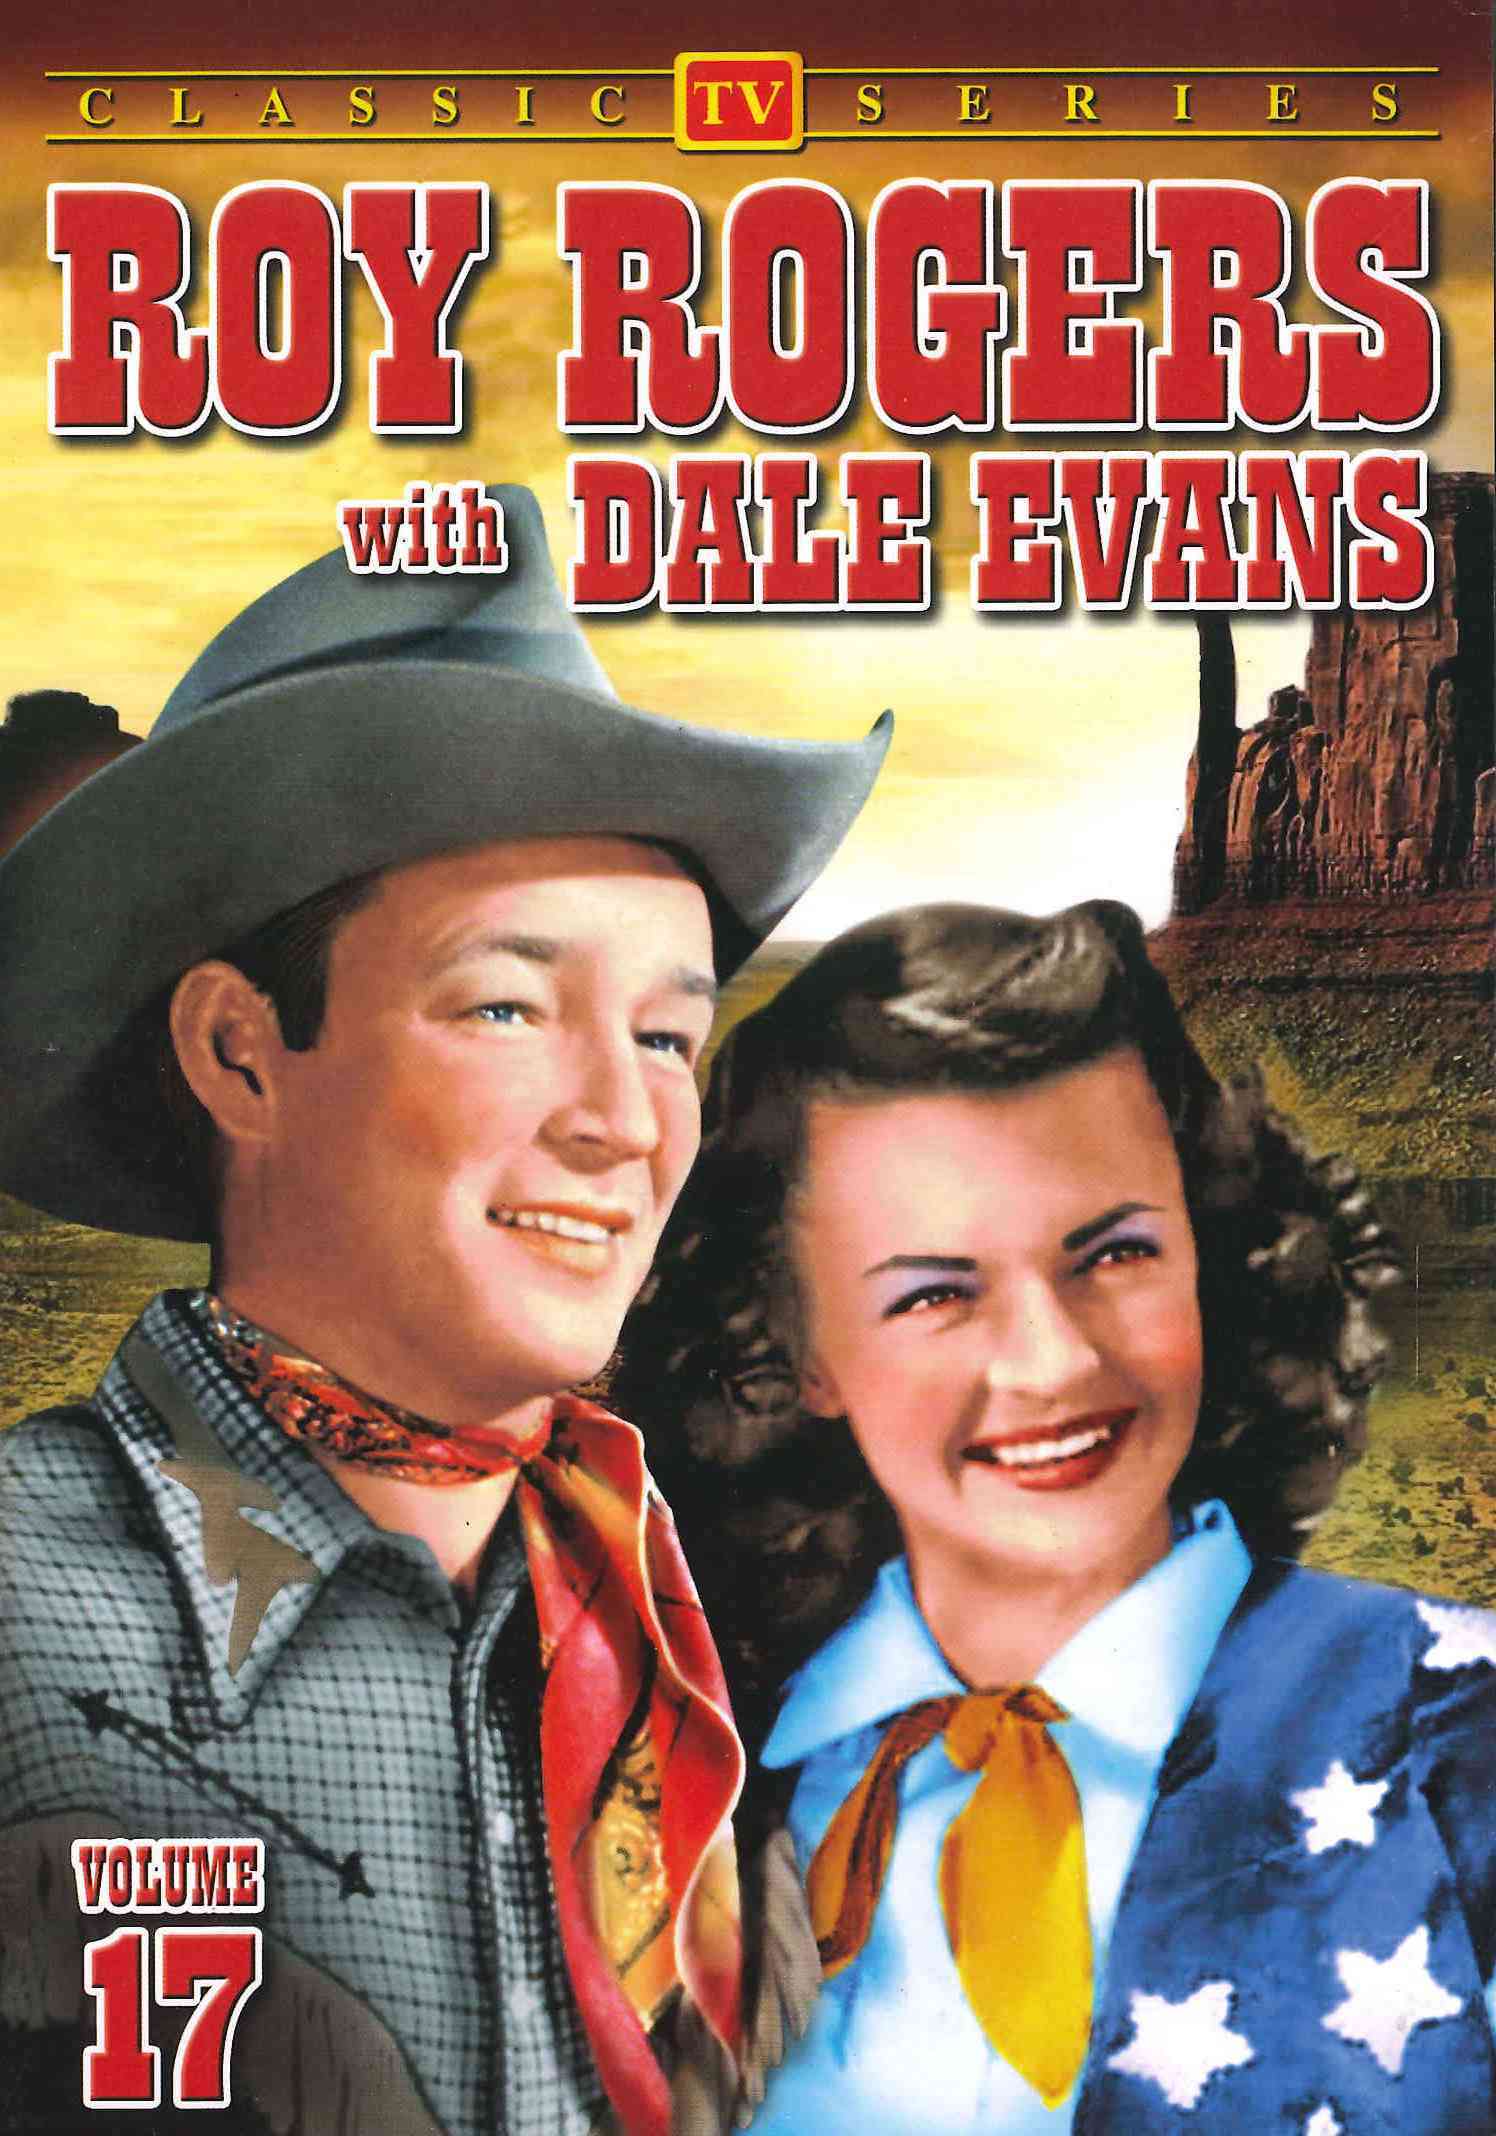 Roy Rogers with Dale Evans, Vol. 17 cover art